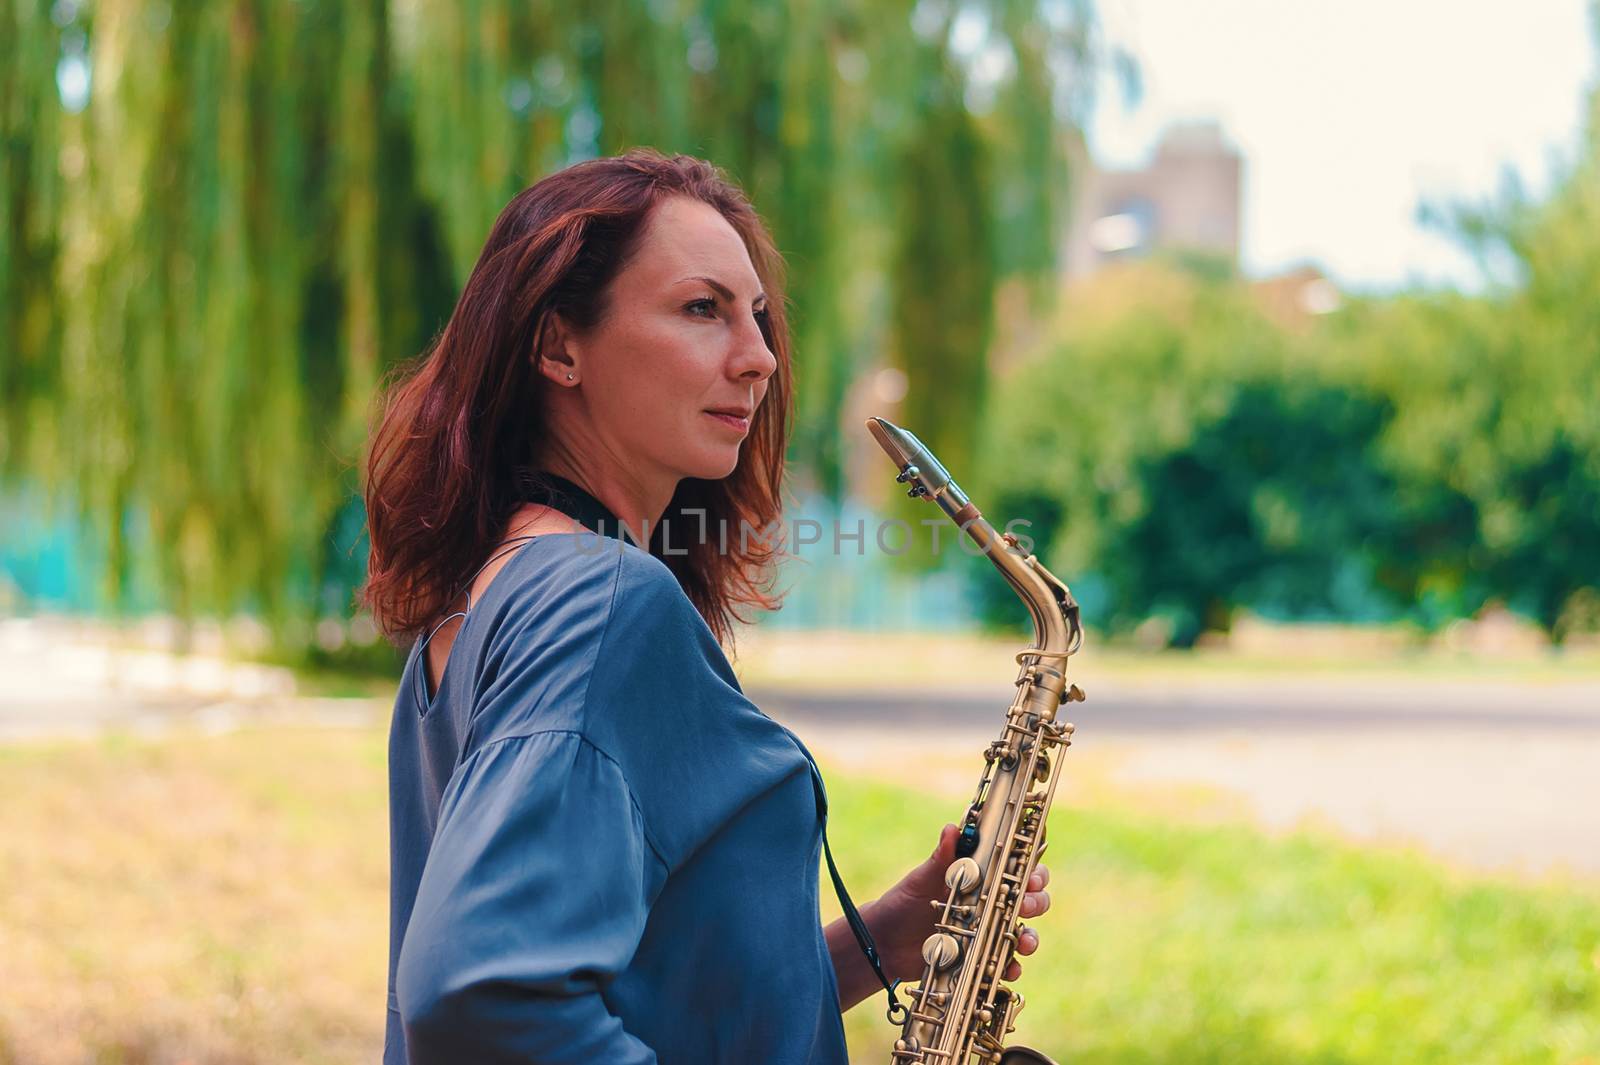 cute young redhead girl in a blue blouse posing with a saxophone in the park